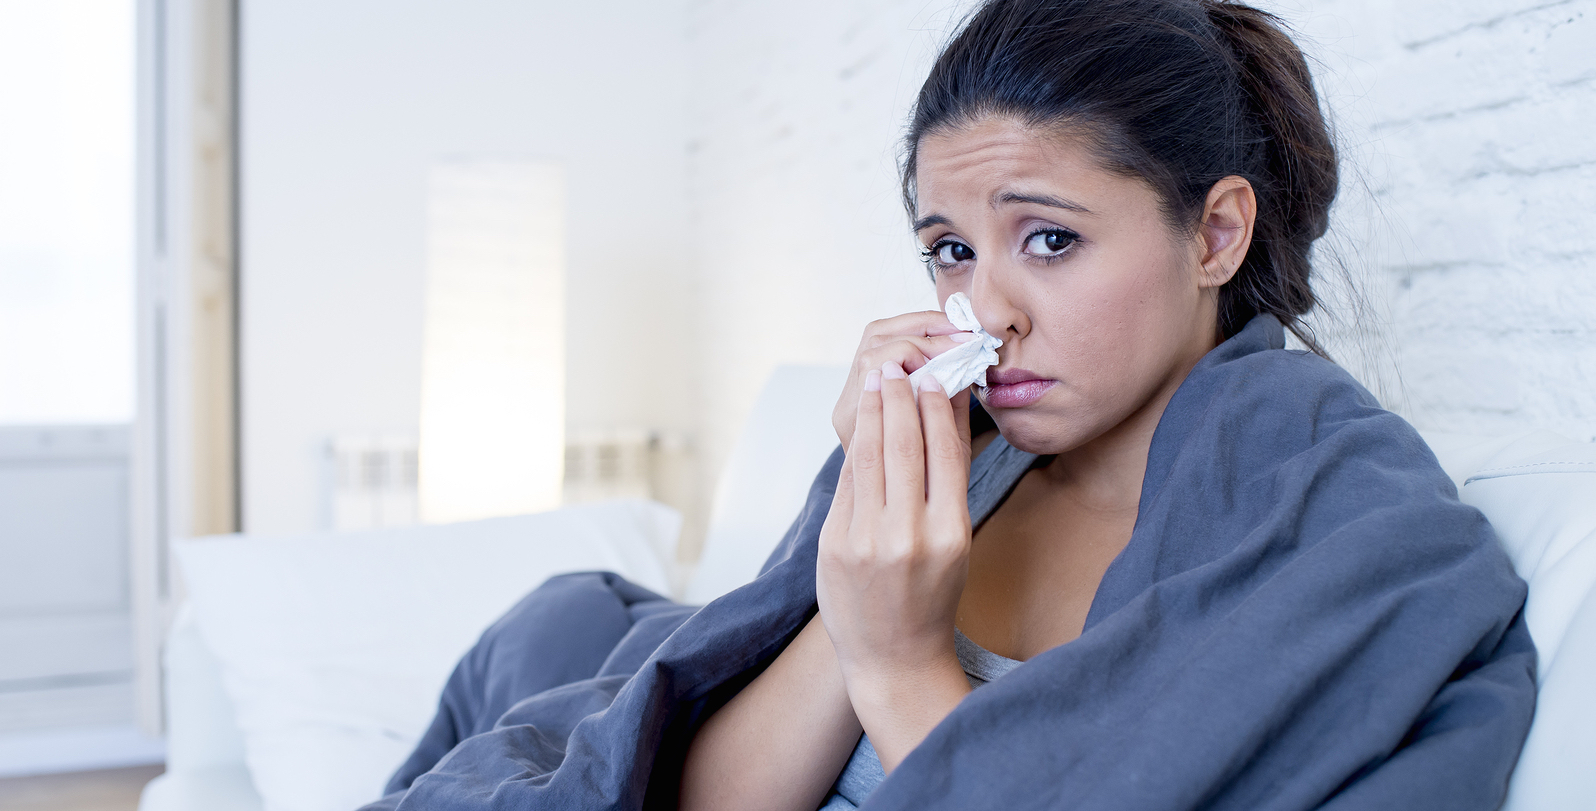 8 Ways To Avoid Colds & Flu | Natural Health Blog